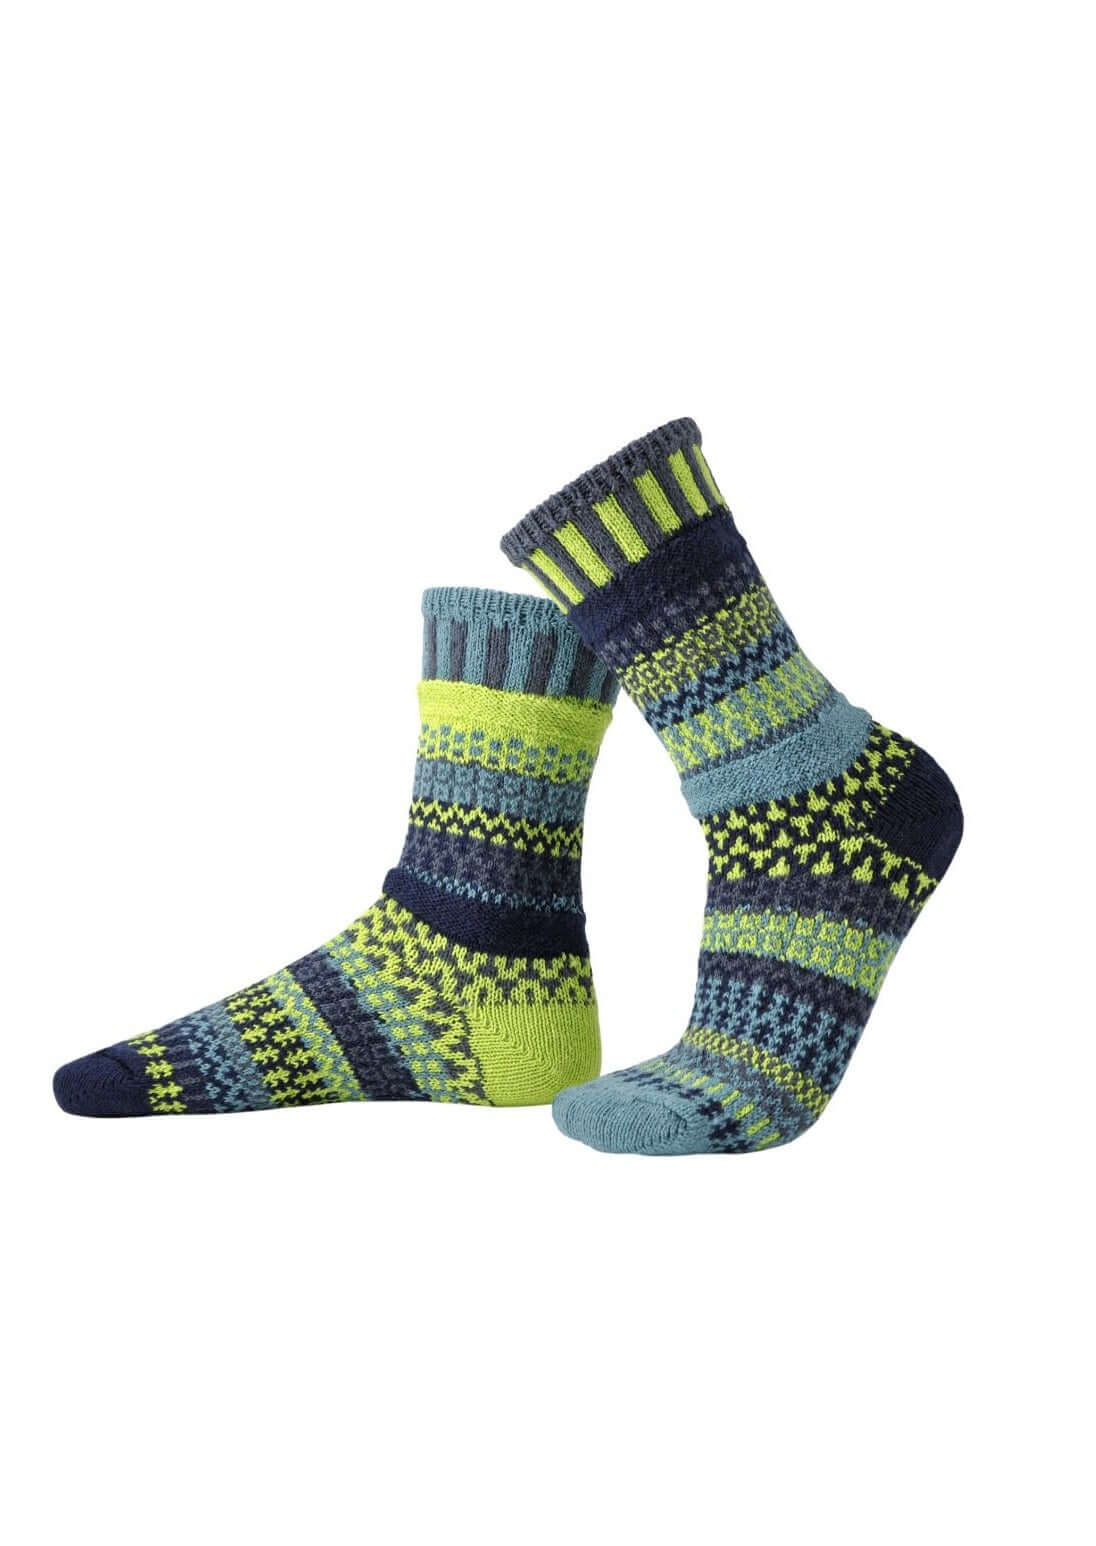 Solmate Socks LEMONGRASS Knitted Crew Socks Proudly Made USA | These socks are delightfully mismatched & so very comfortable. American Made Clothing